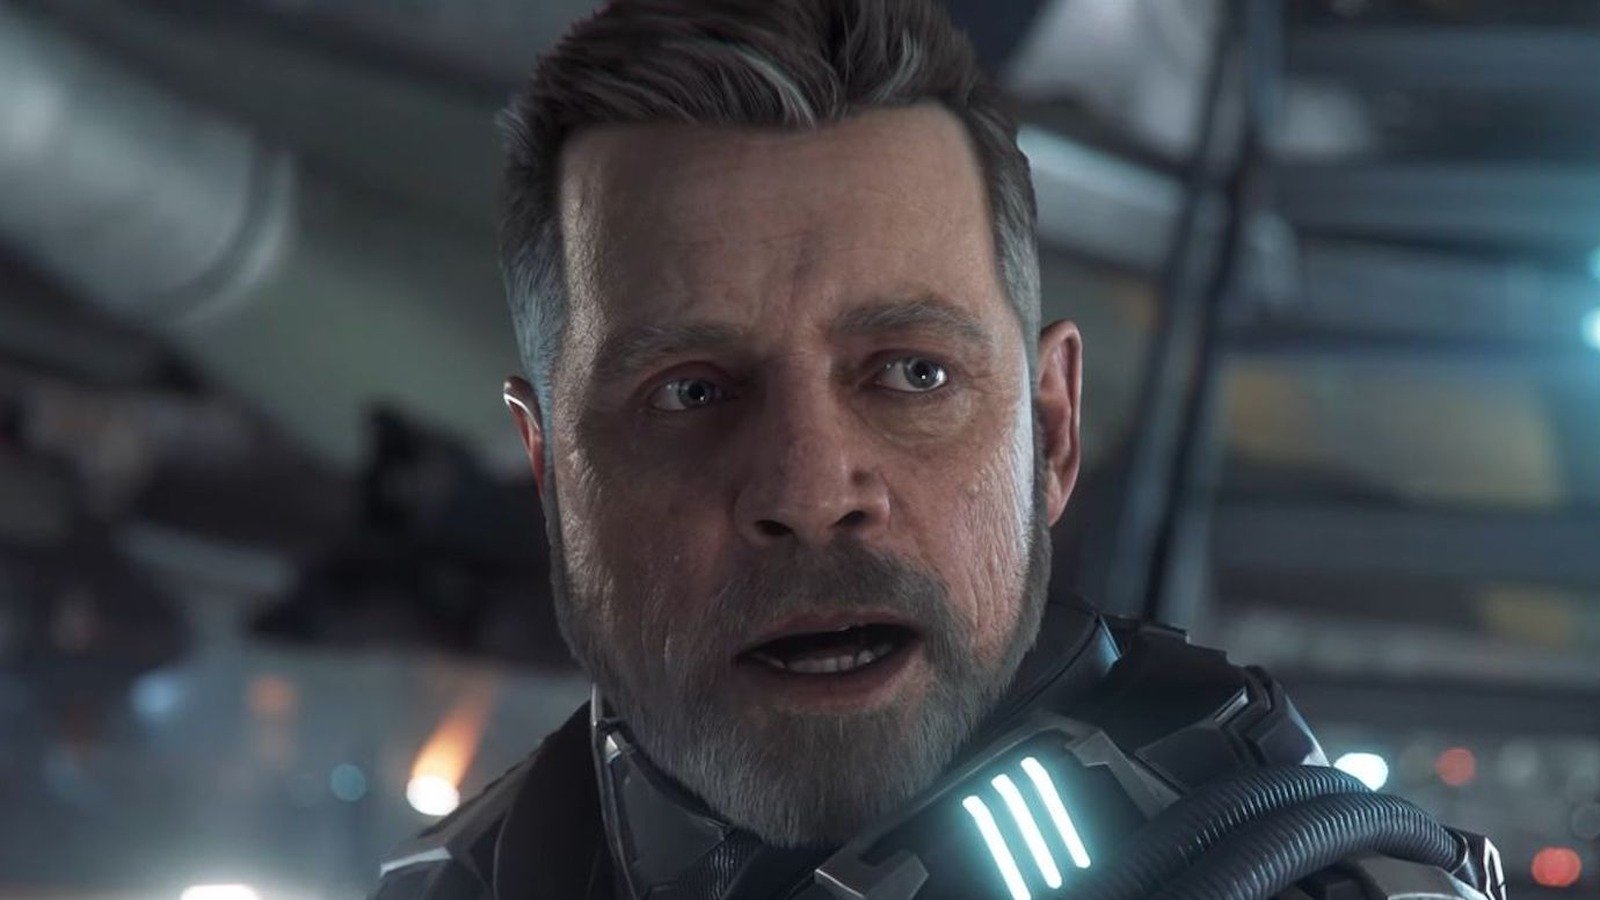 The Real Reason Star Citizen Just Added A Disclaimer - SVG